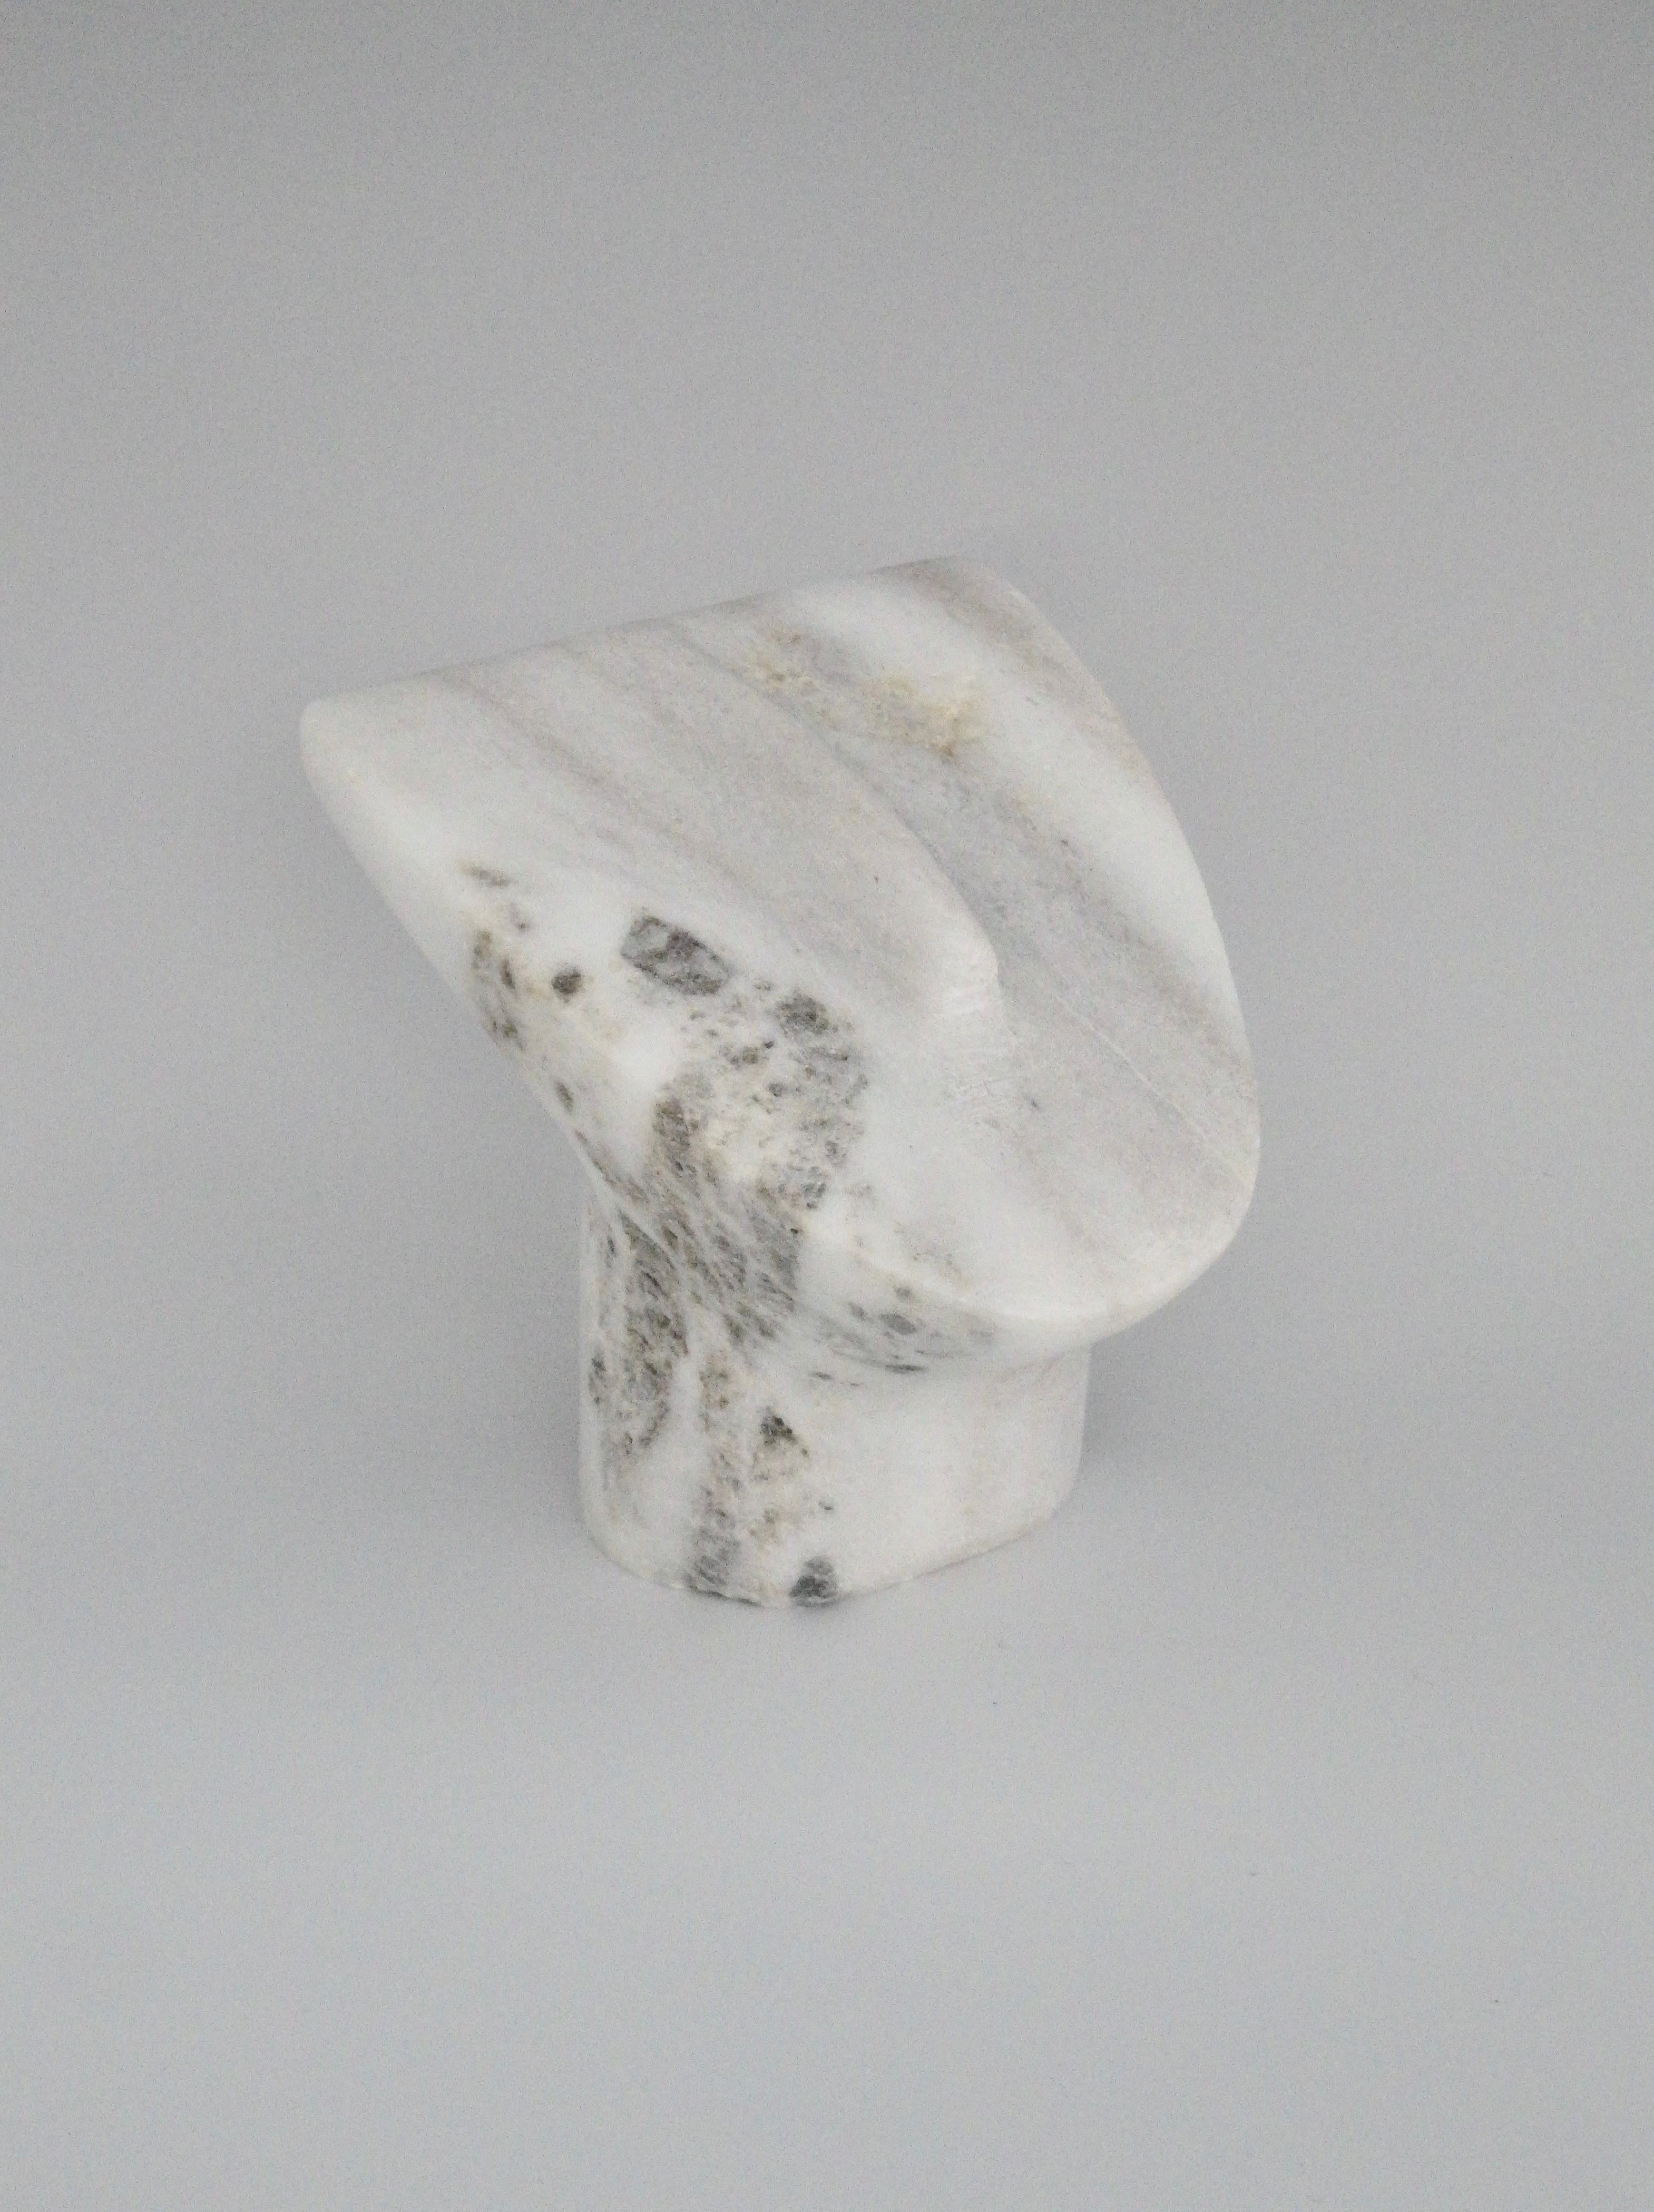 A serene, modernist white marble abstract face sculpture from a Bloomfield Hills, M estate. Veining in grays and tans. Perfect for your desktop, book shelf, or alter.